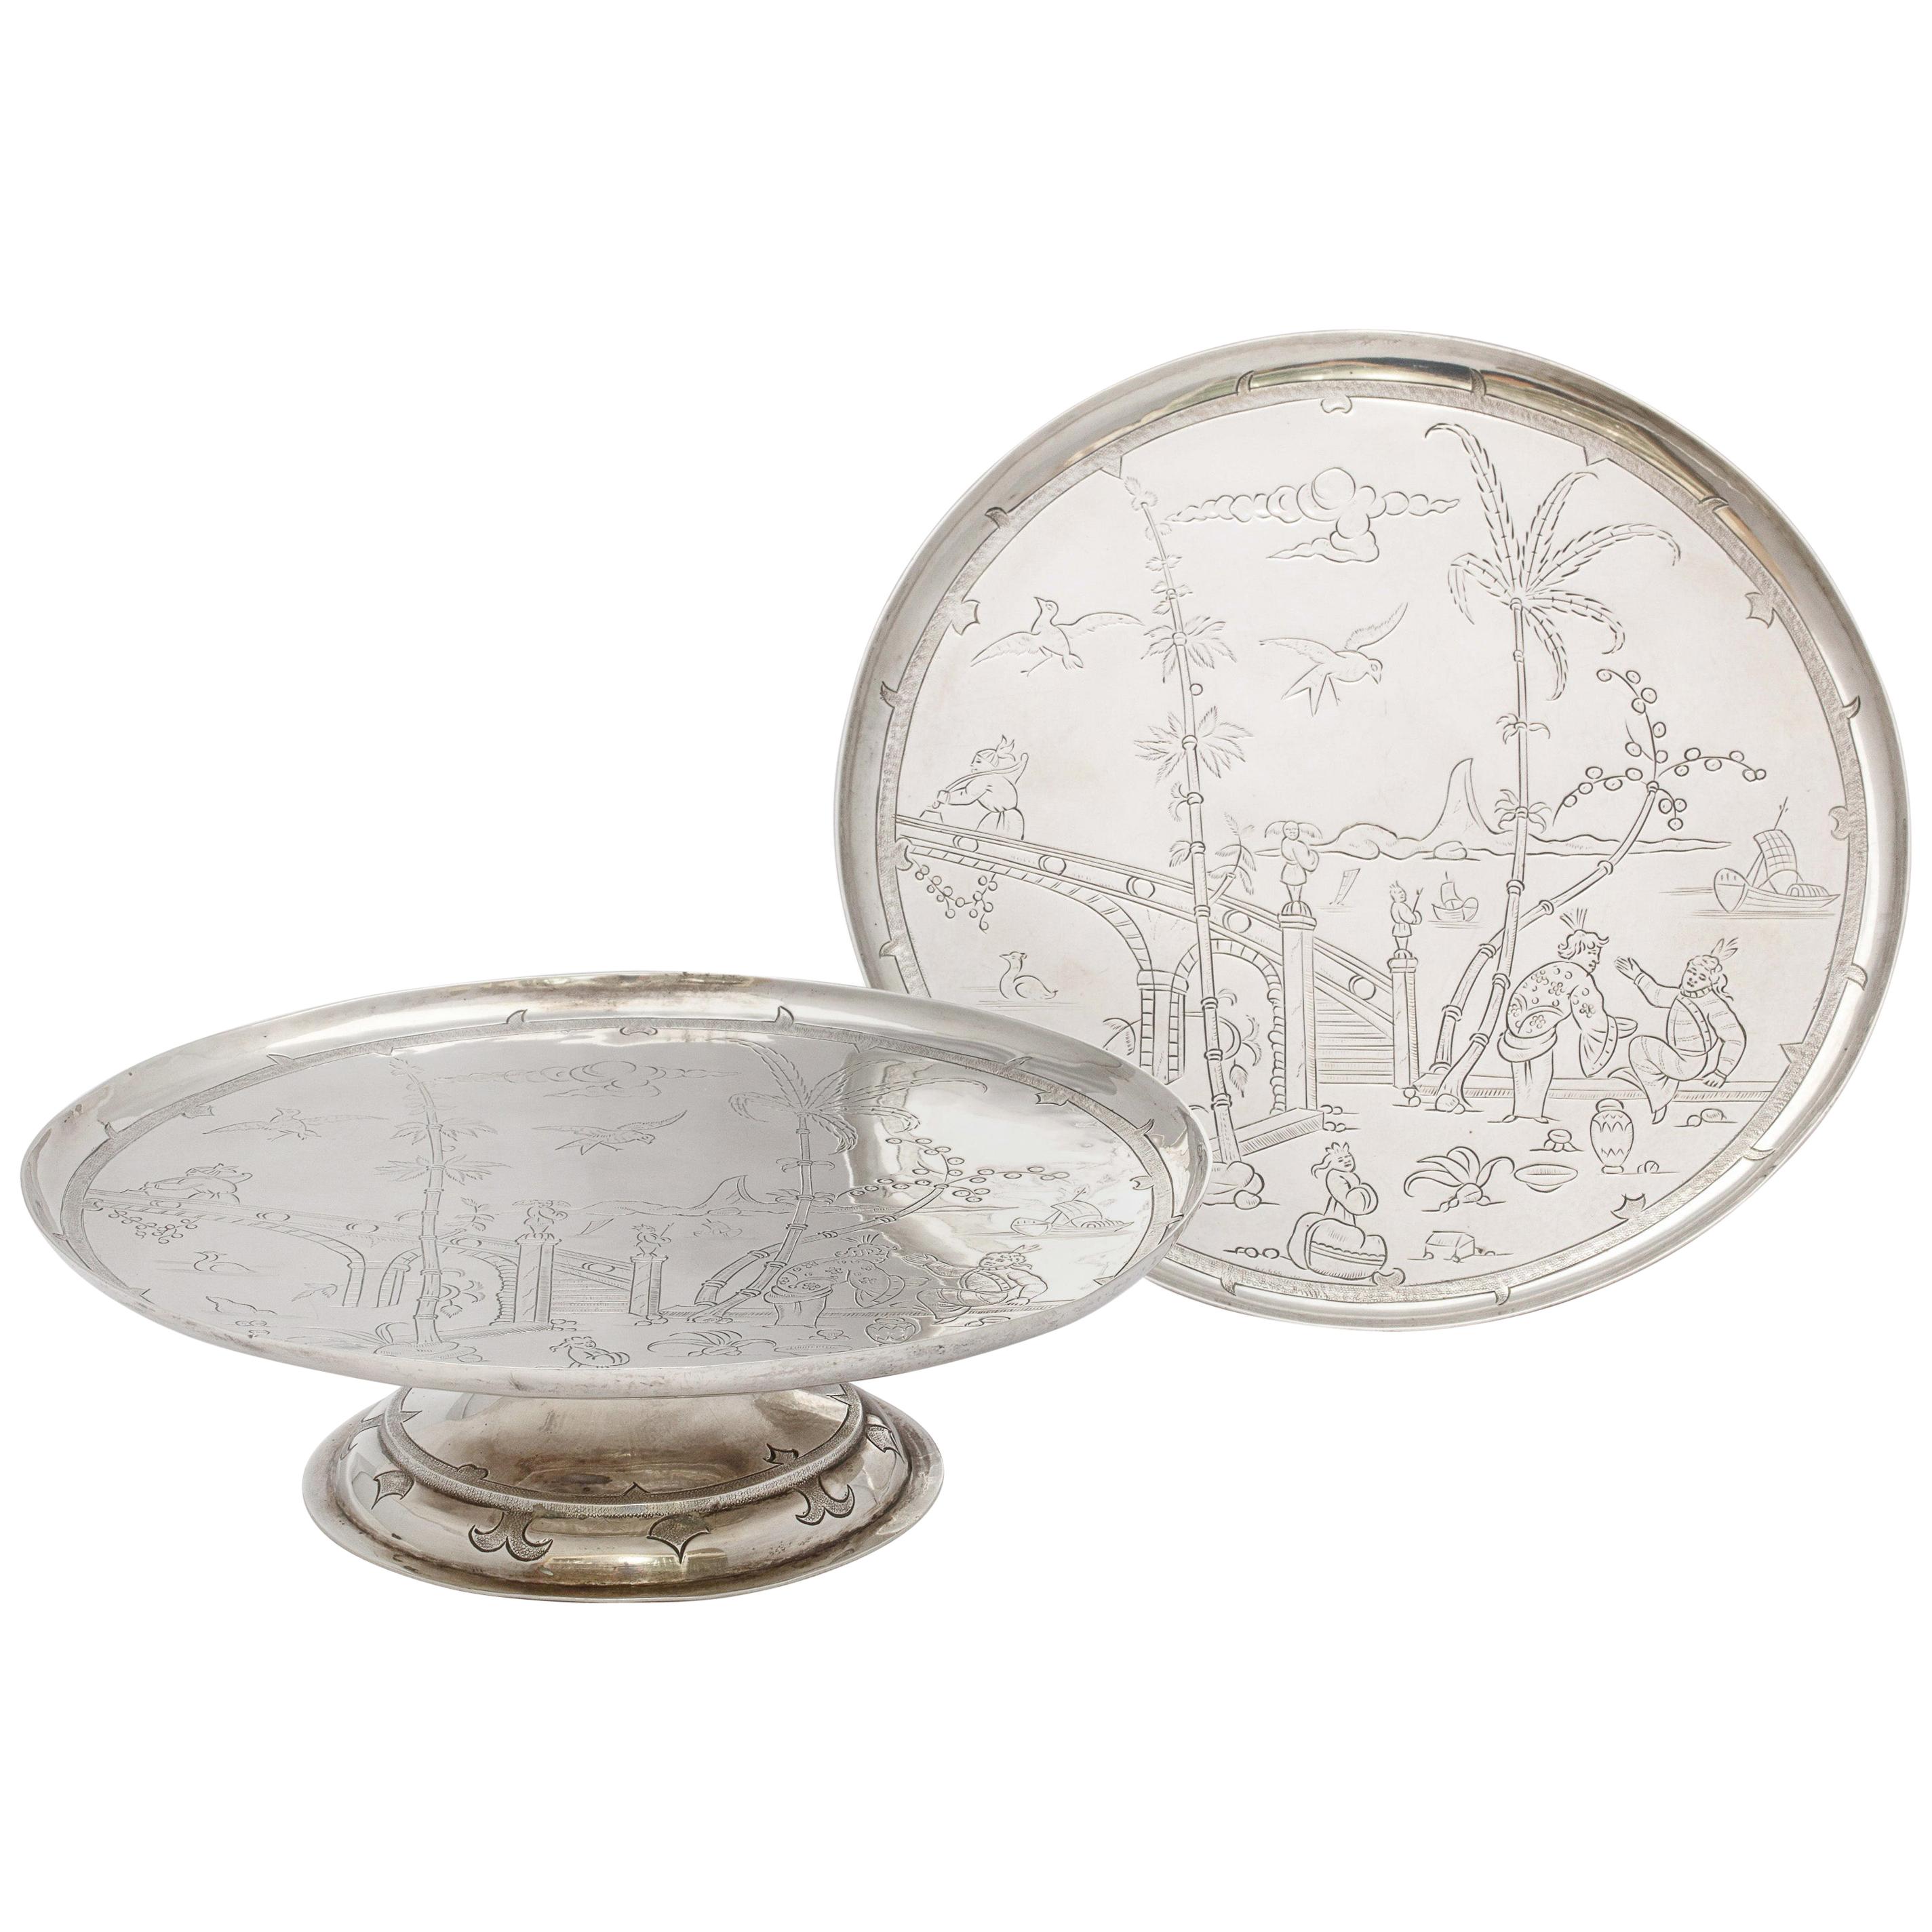 Pair of Edwardian Chinoiserie-Style Sterling Silver Tazzas by Crichton